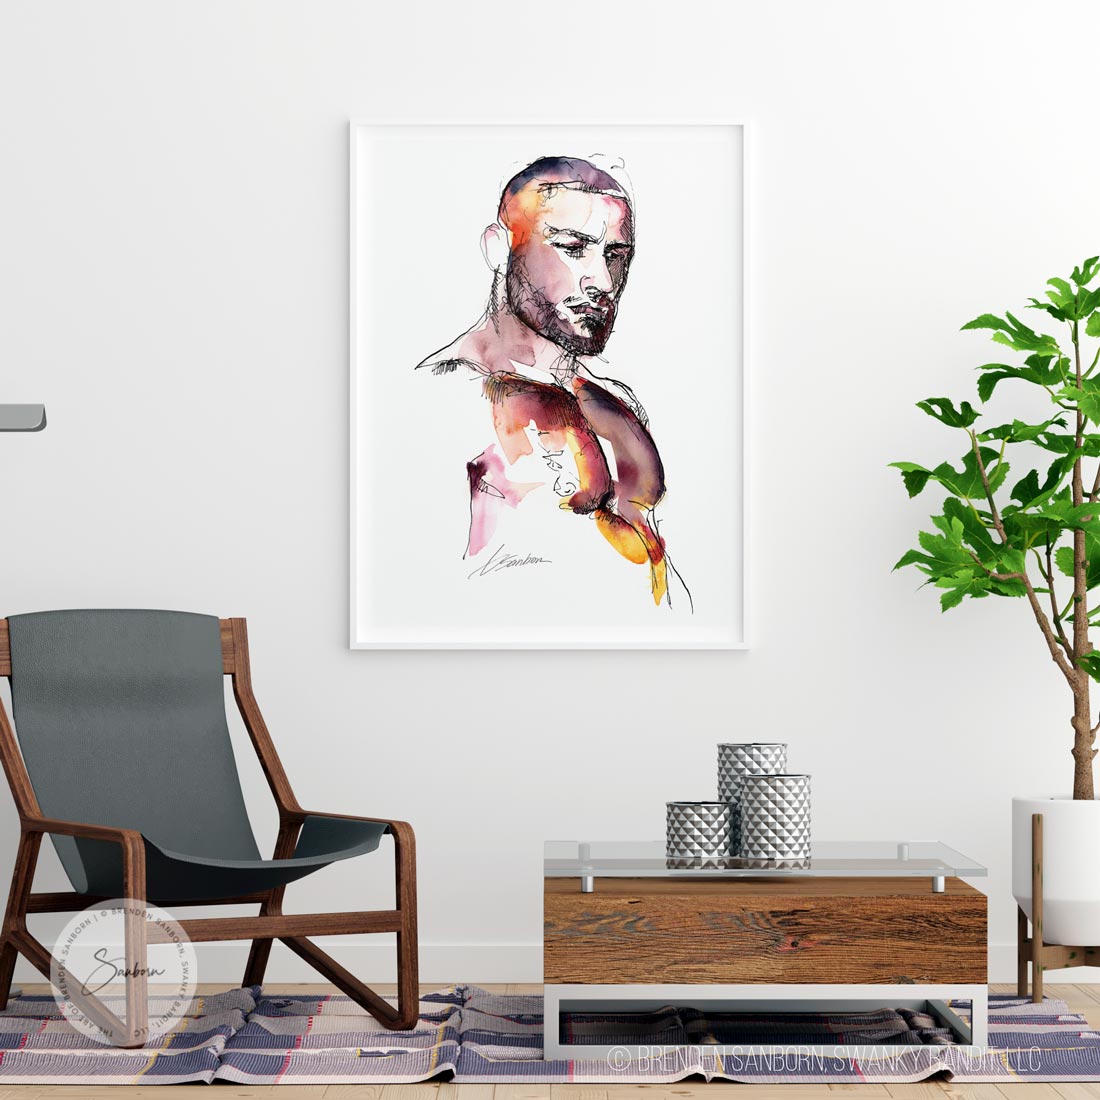 Captivating Male Nude Art Print of a Strong Chested, Bearded Man - Giclee Art Print